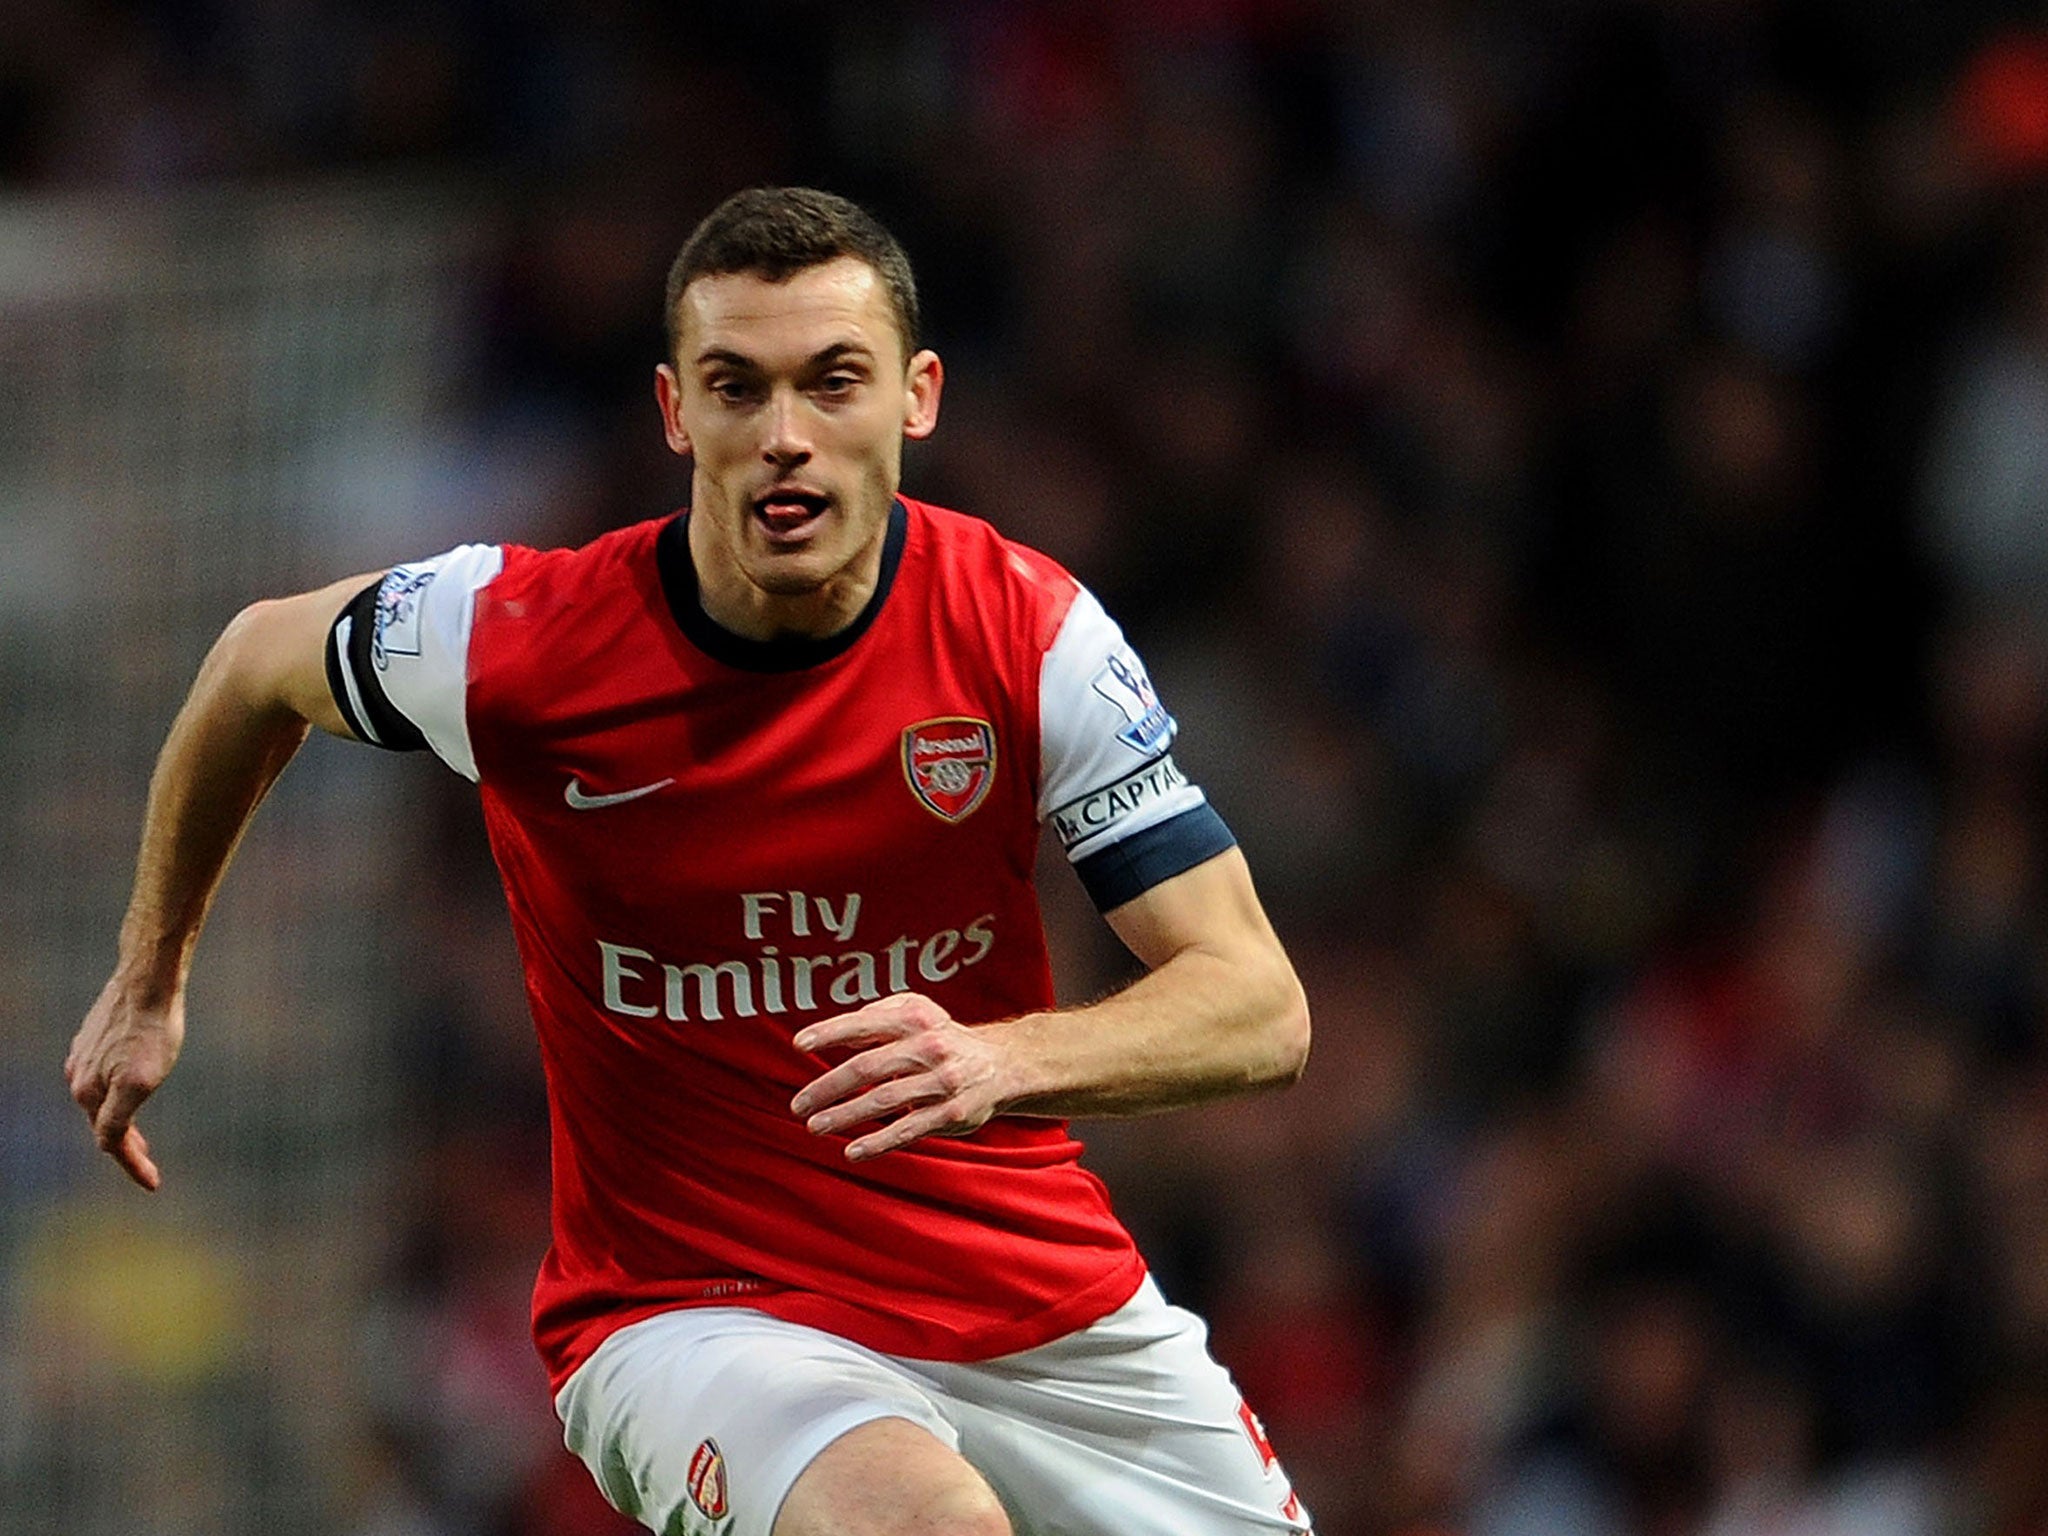 Arsenal captain Thomas Vermaelen has moved a step
closer to joining Manchester United